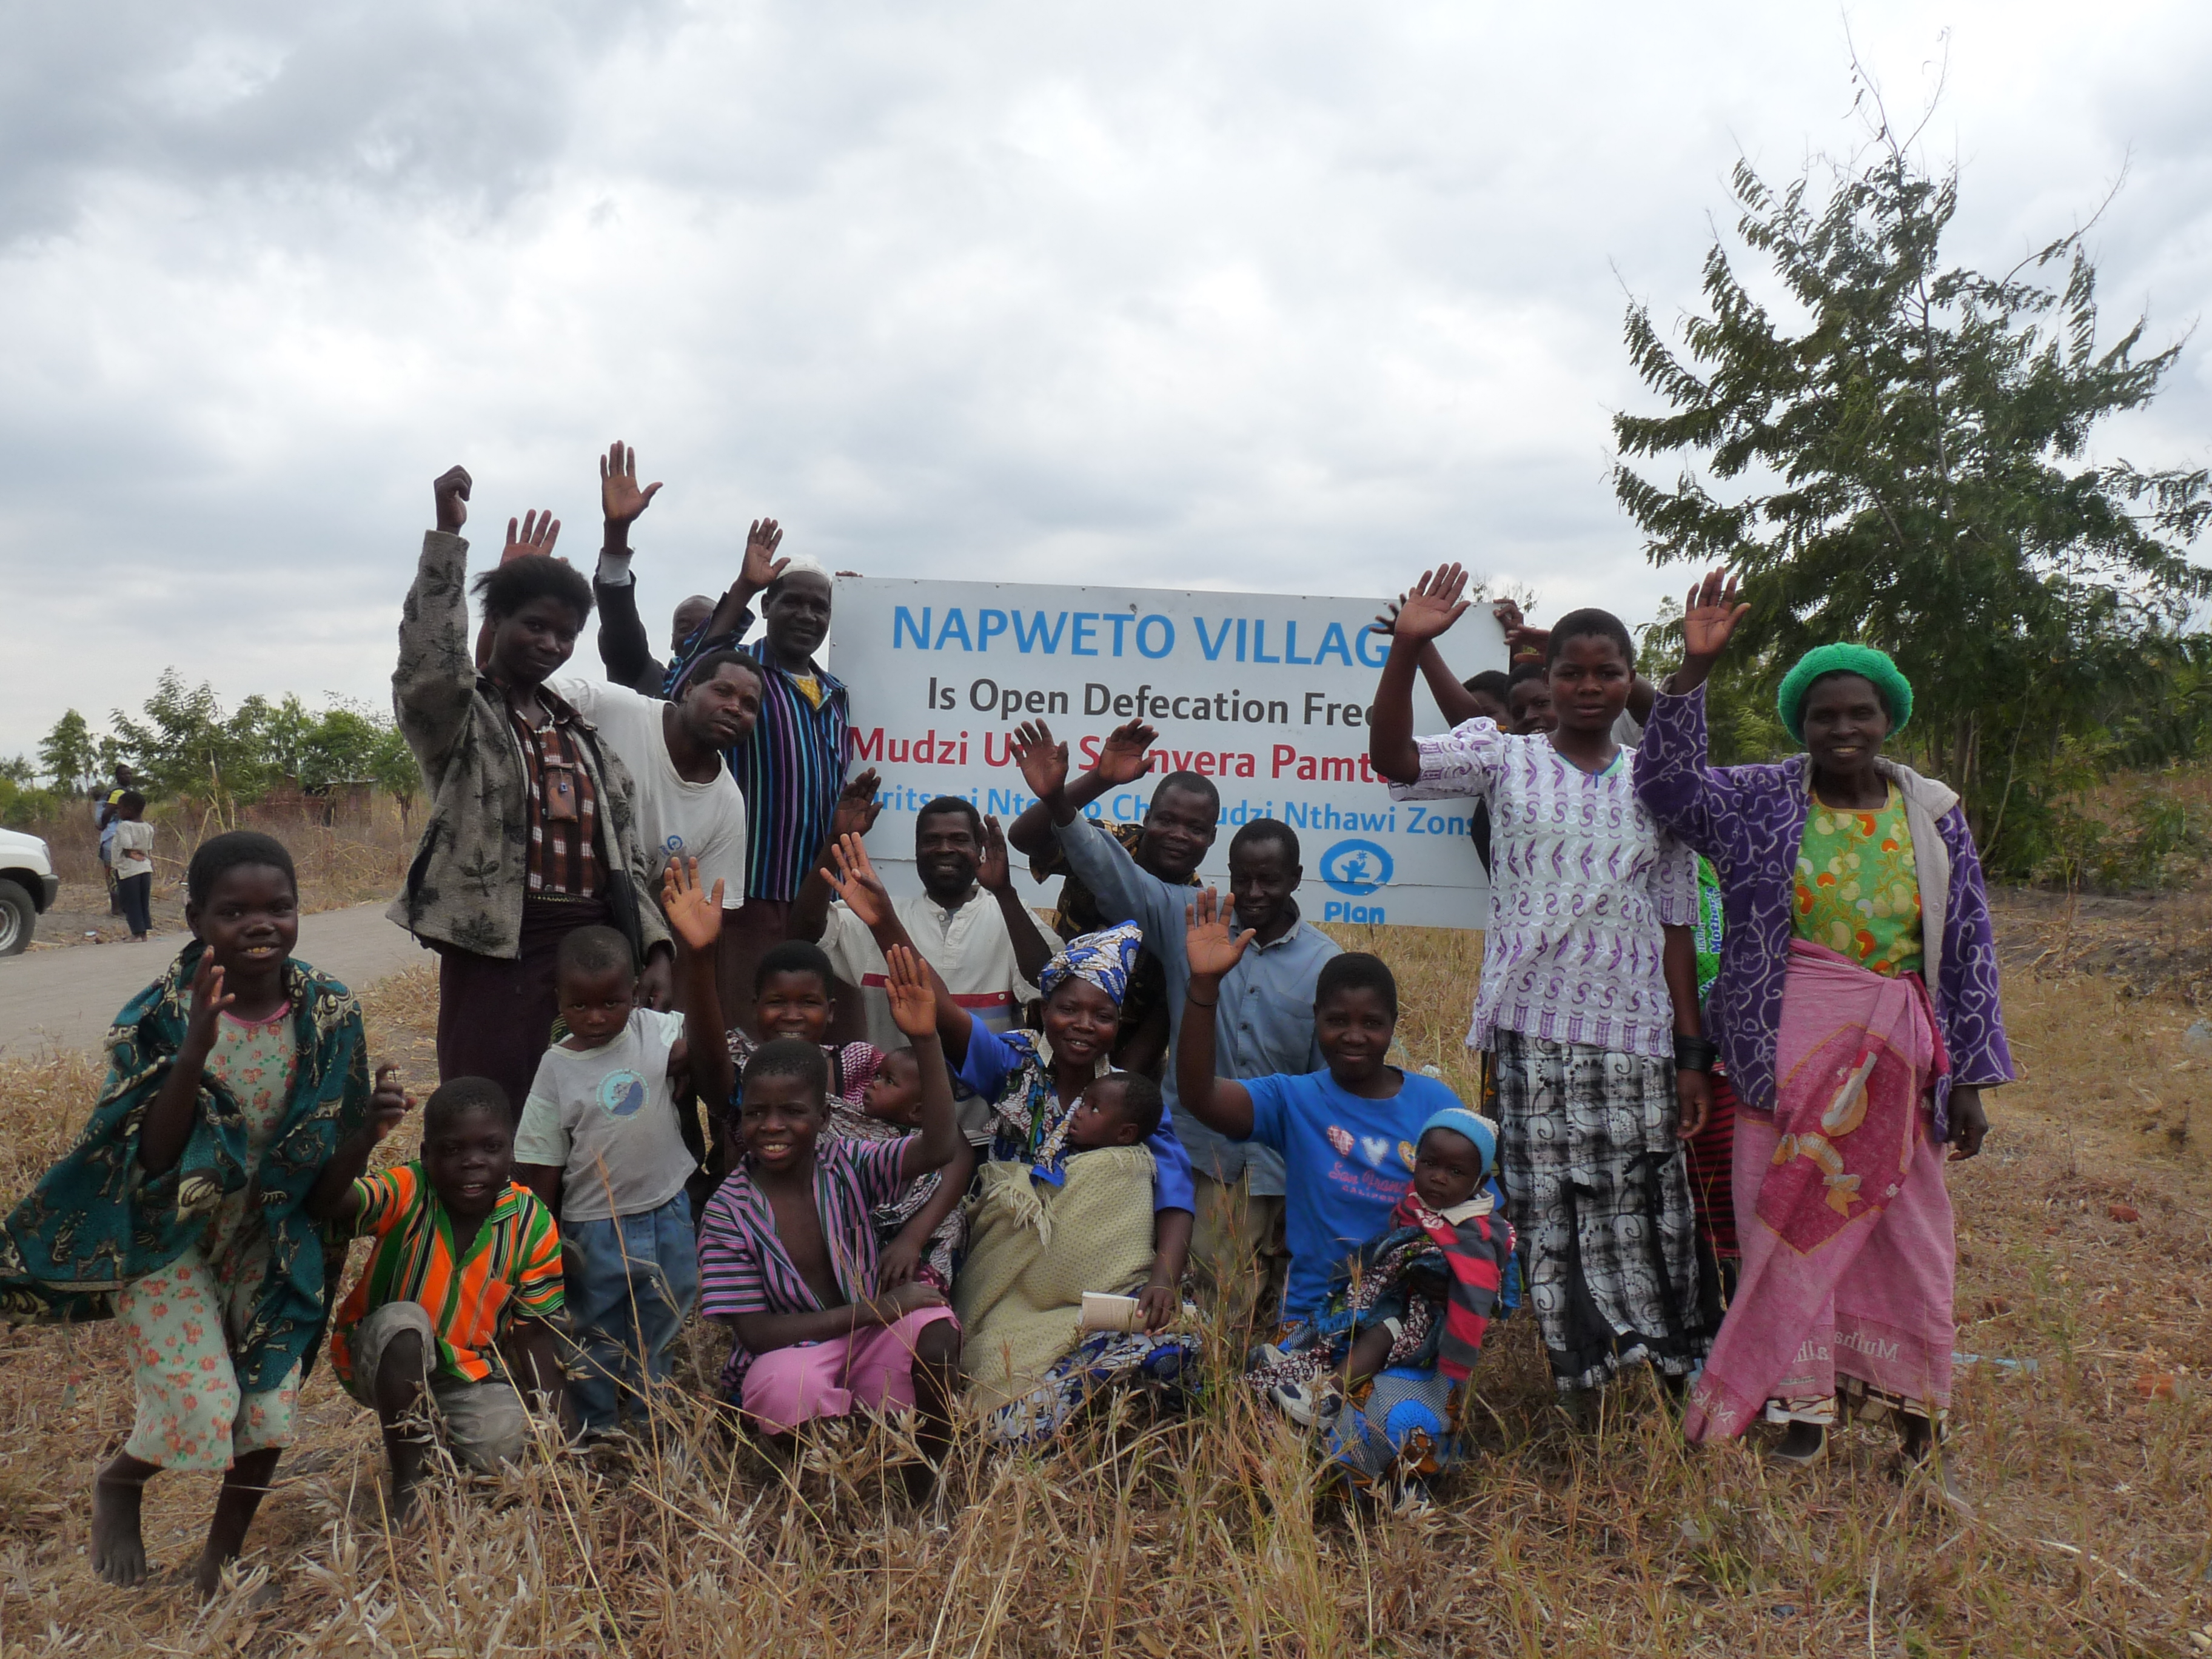 Community celebrating their village being open defecation free - Malawi 2012